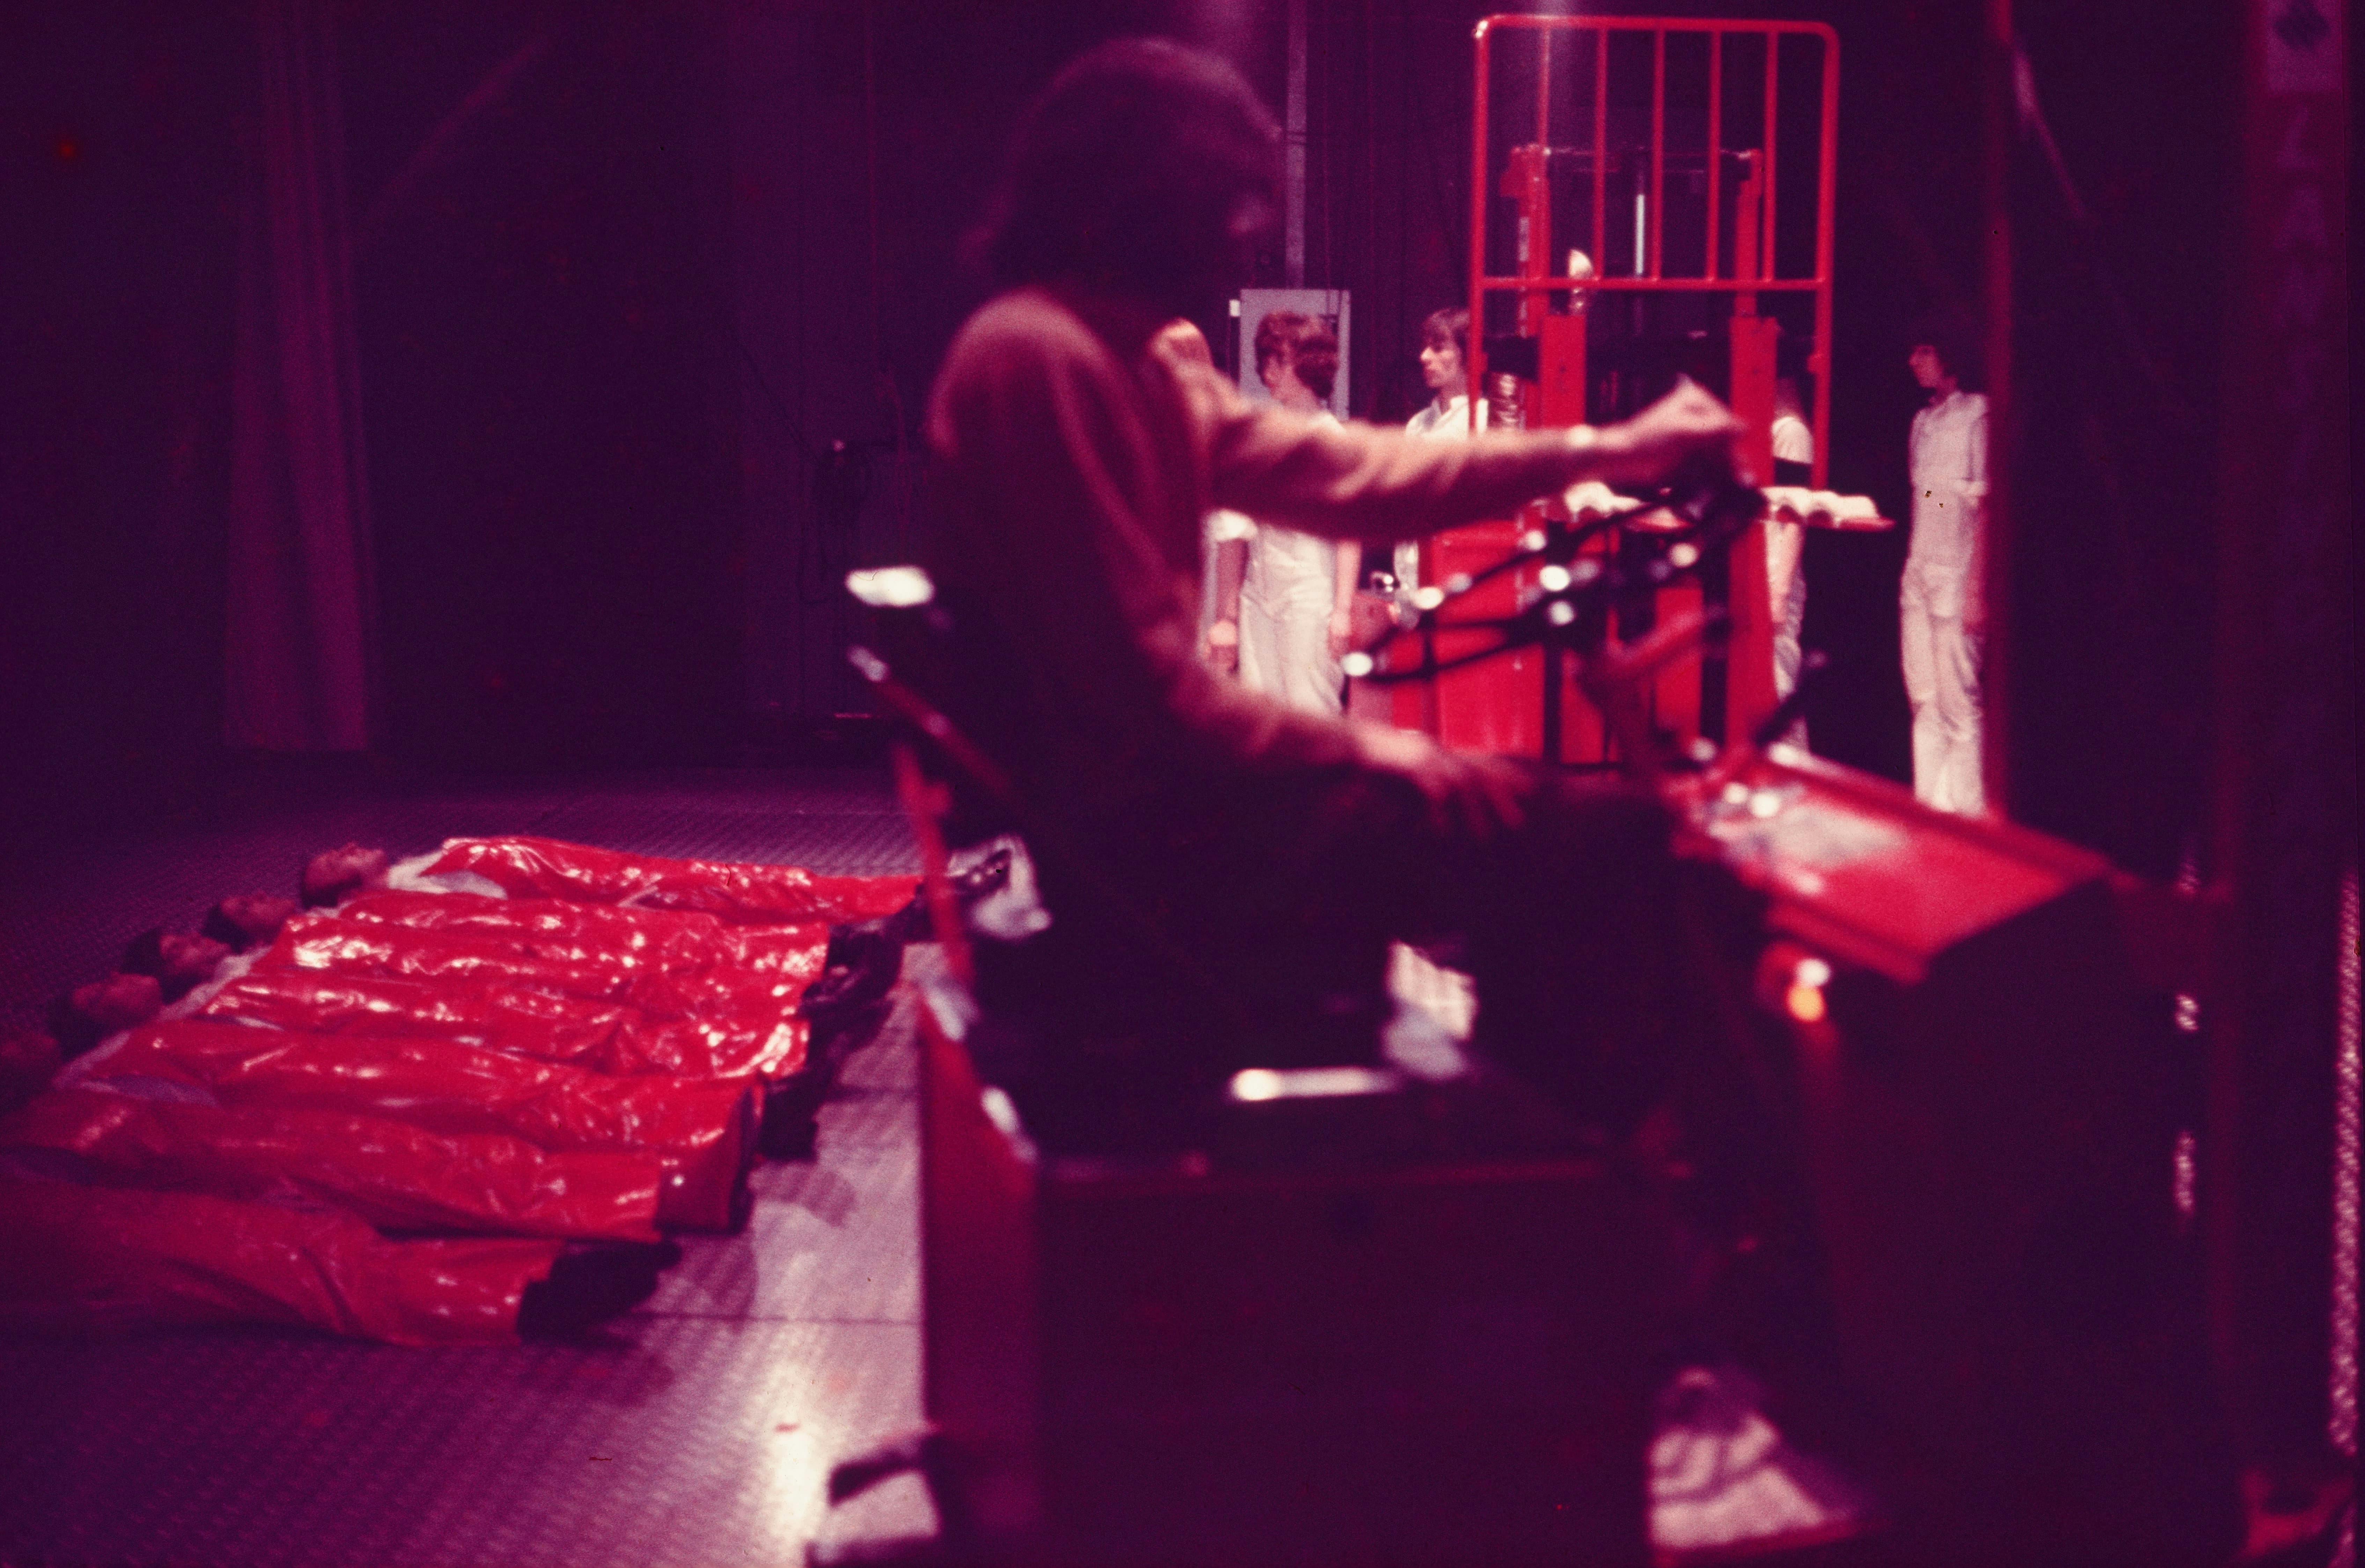 A color photograph. In the foreground, taking up most of the right side of the image, a man appears mid-motion driving a red forklift. To his left, performers wearing red vinyl costumes lie face up in a line on an industrial floor, their arms above their heads and their legs kicked up against a corresponding line of standing performers in white, who are holding their feet. At the feet of this group, and behind the driven forklift, several standing figures in white approach the line of performers in red in a loose formation. 